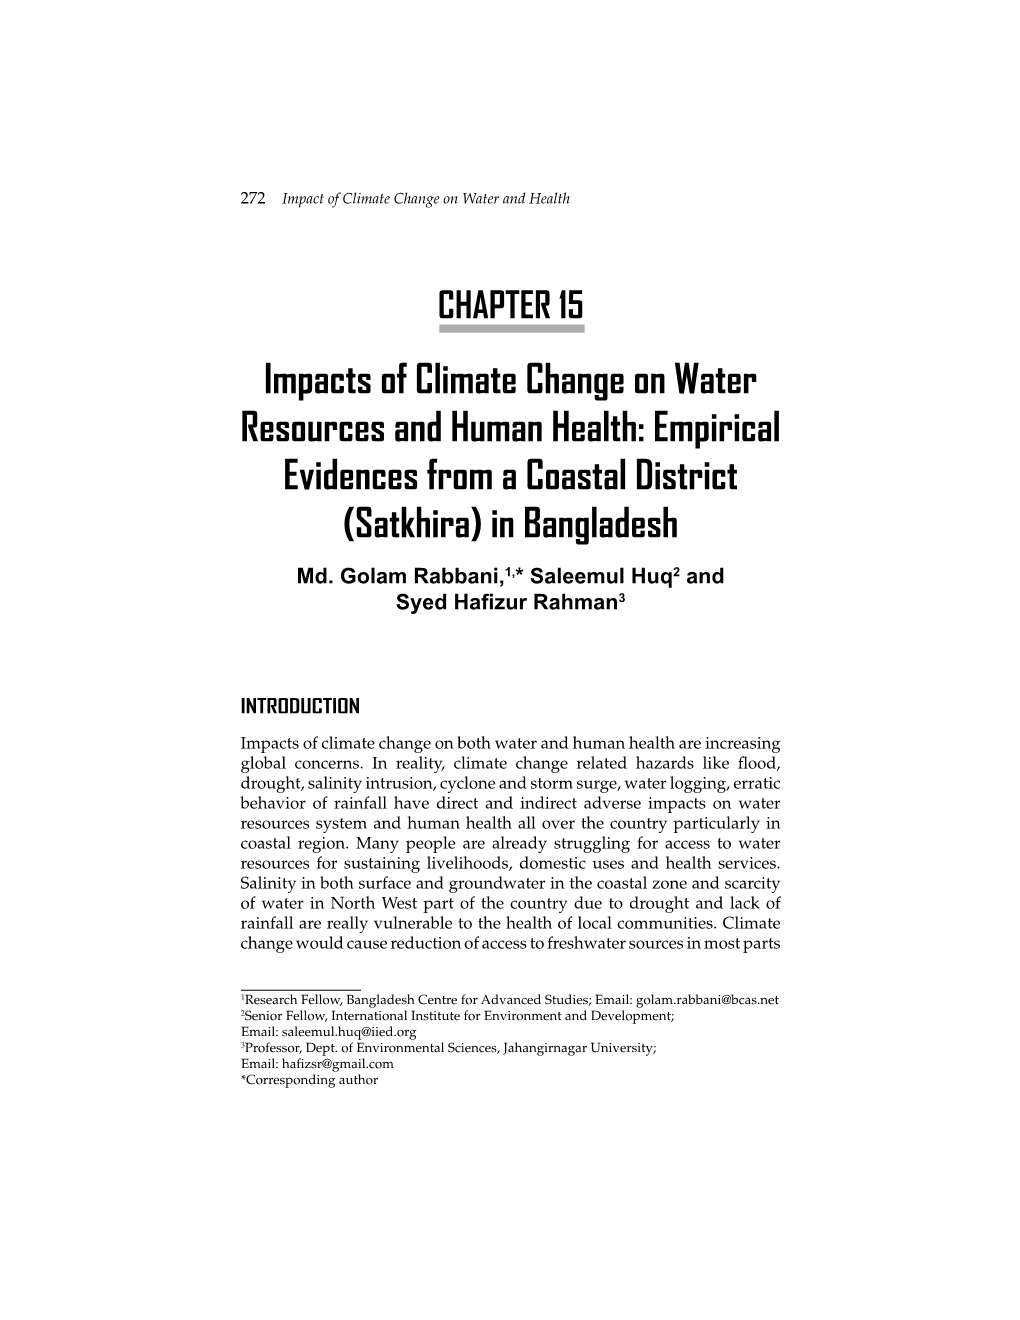 Impacts of Climate Change on Water Resources and Human Health: Empirical Evidences from a Coastal District (Satkhira) in Bangladesh Md